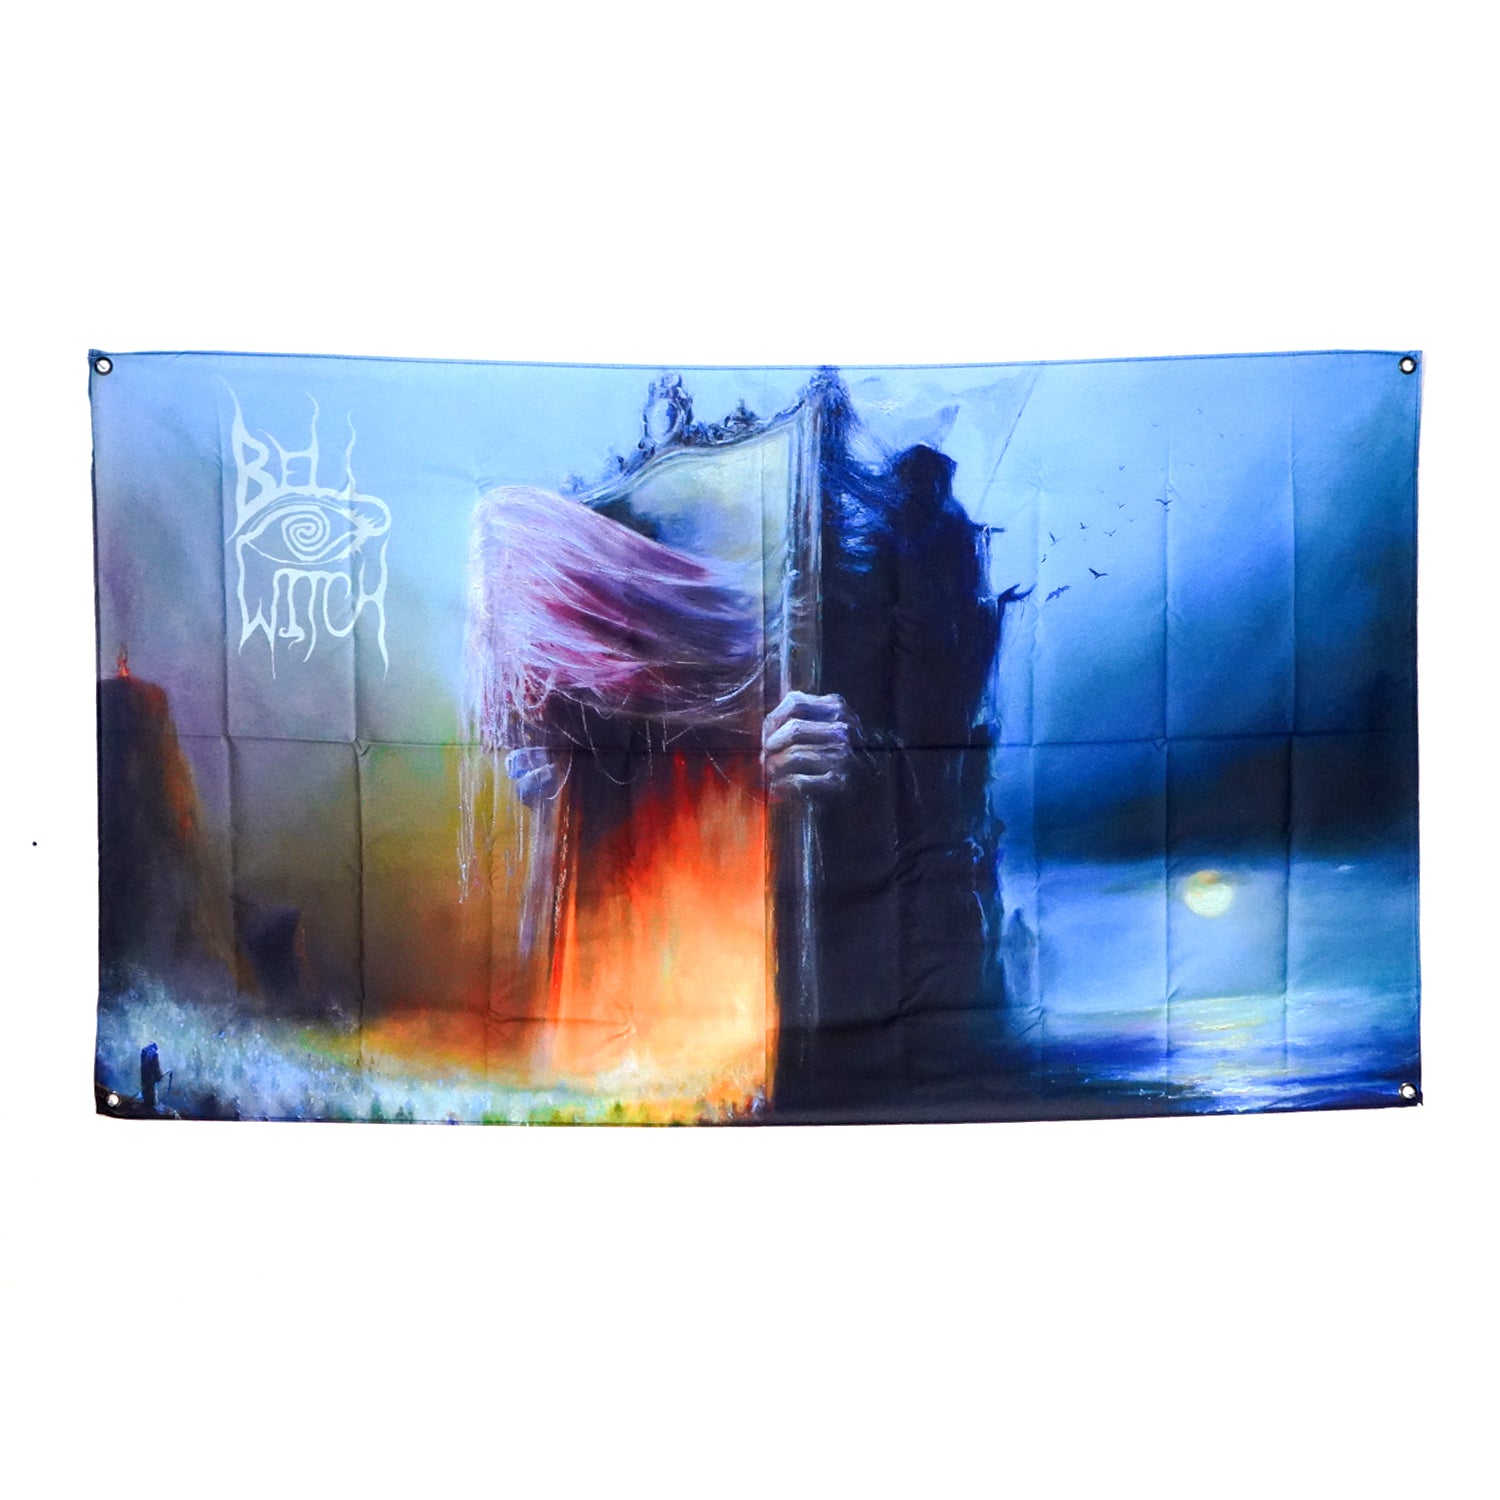 BELL WITCH "Mirror Reaper" Flag